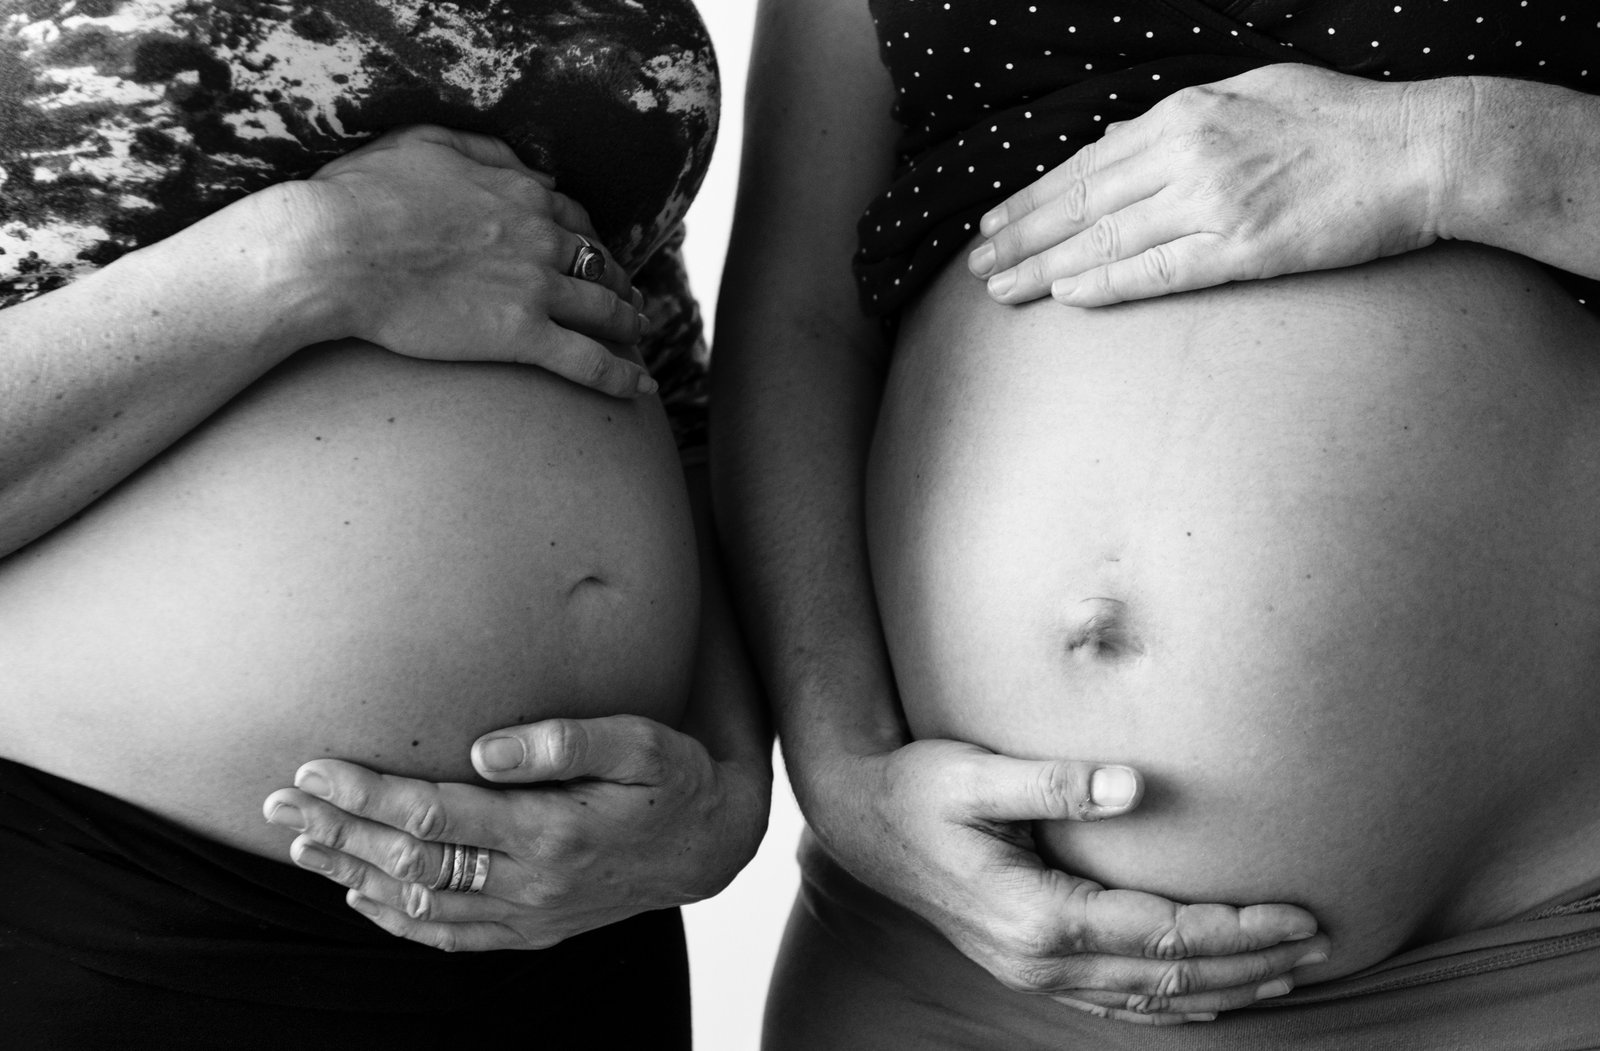 Pregnancy Beauty Tips from Our Founder